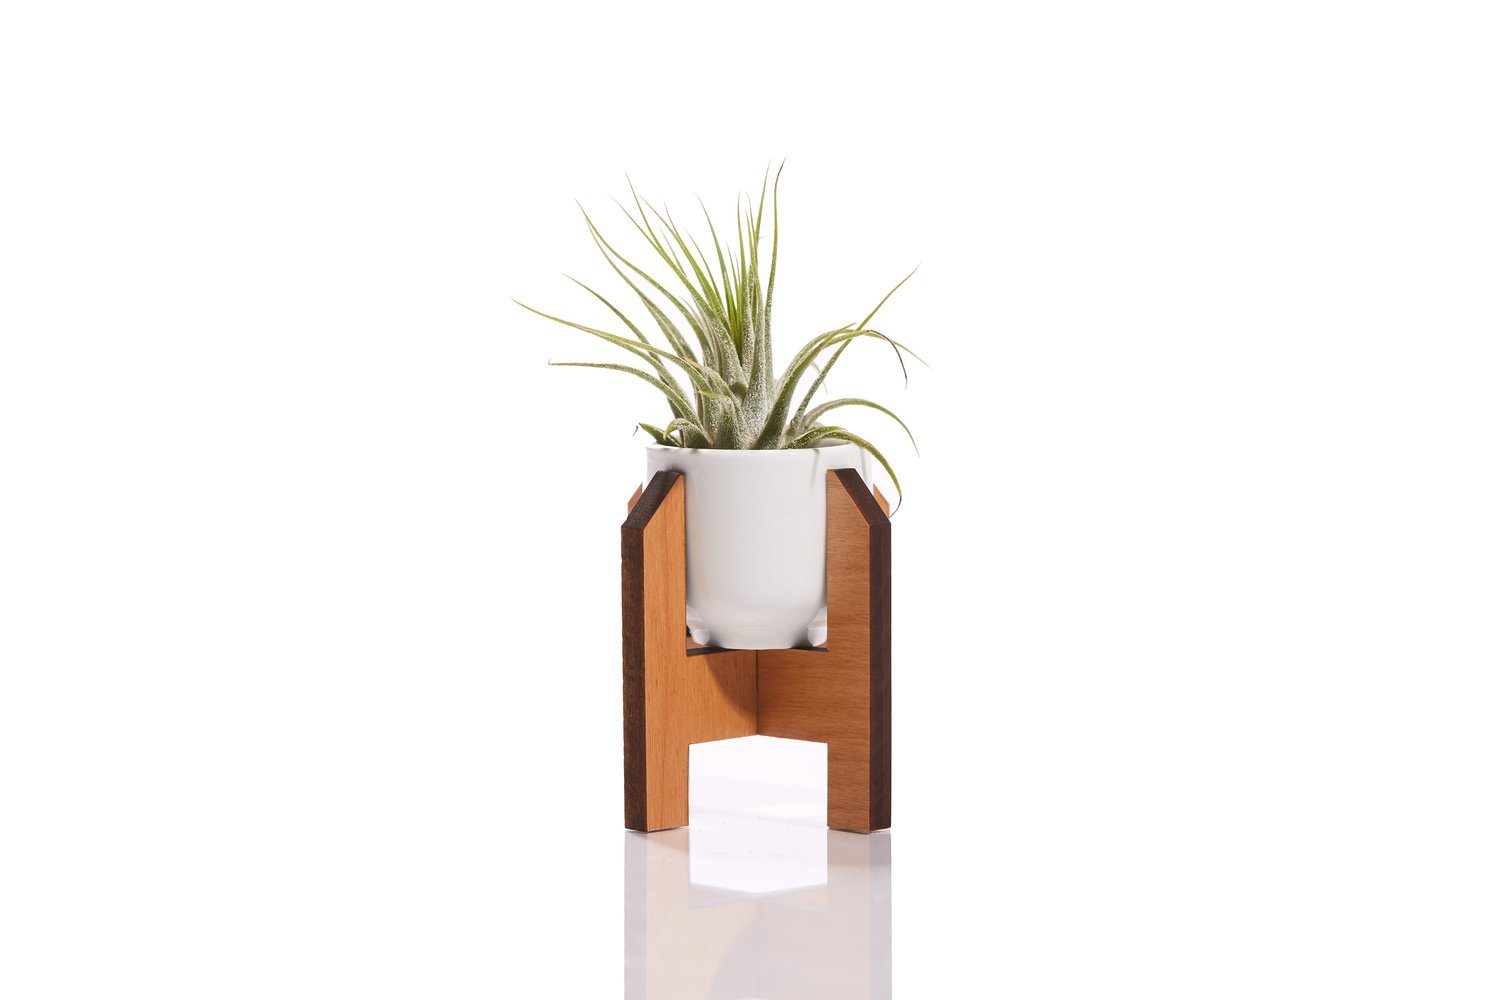 Shop Minimalist Mini Planter / Ceramic + Wood Modern Plant Stand from Lucca on Openhaus